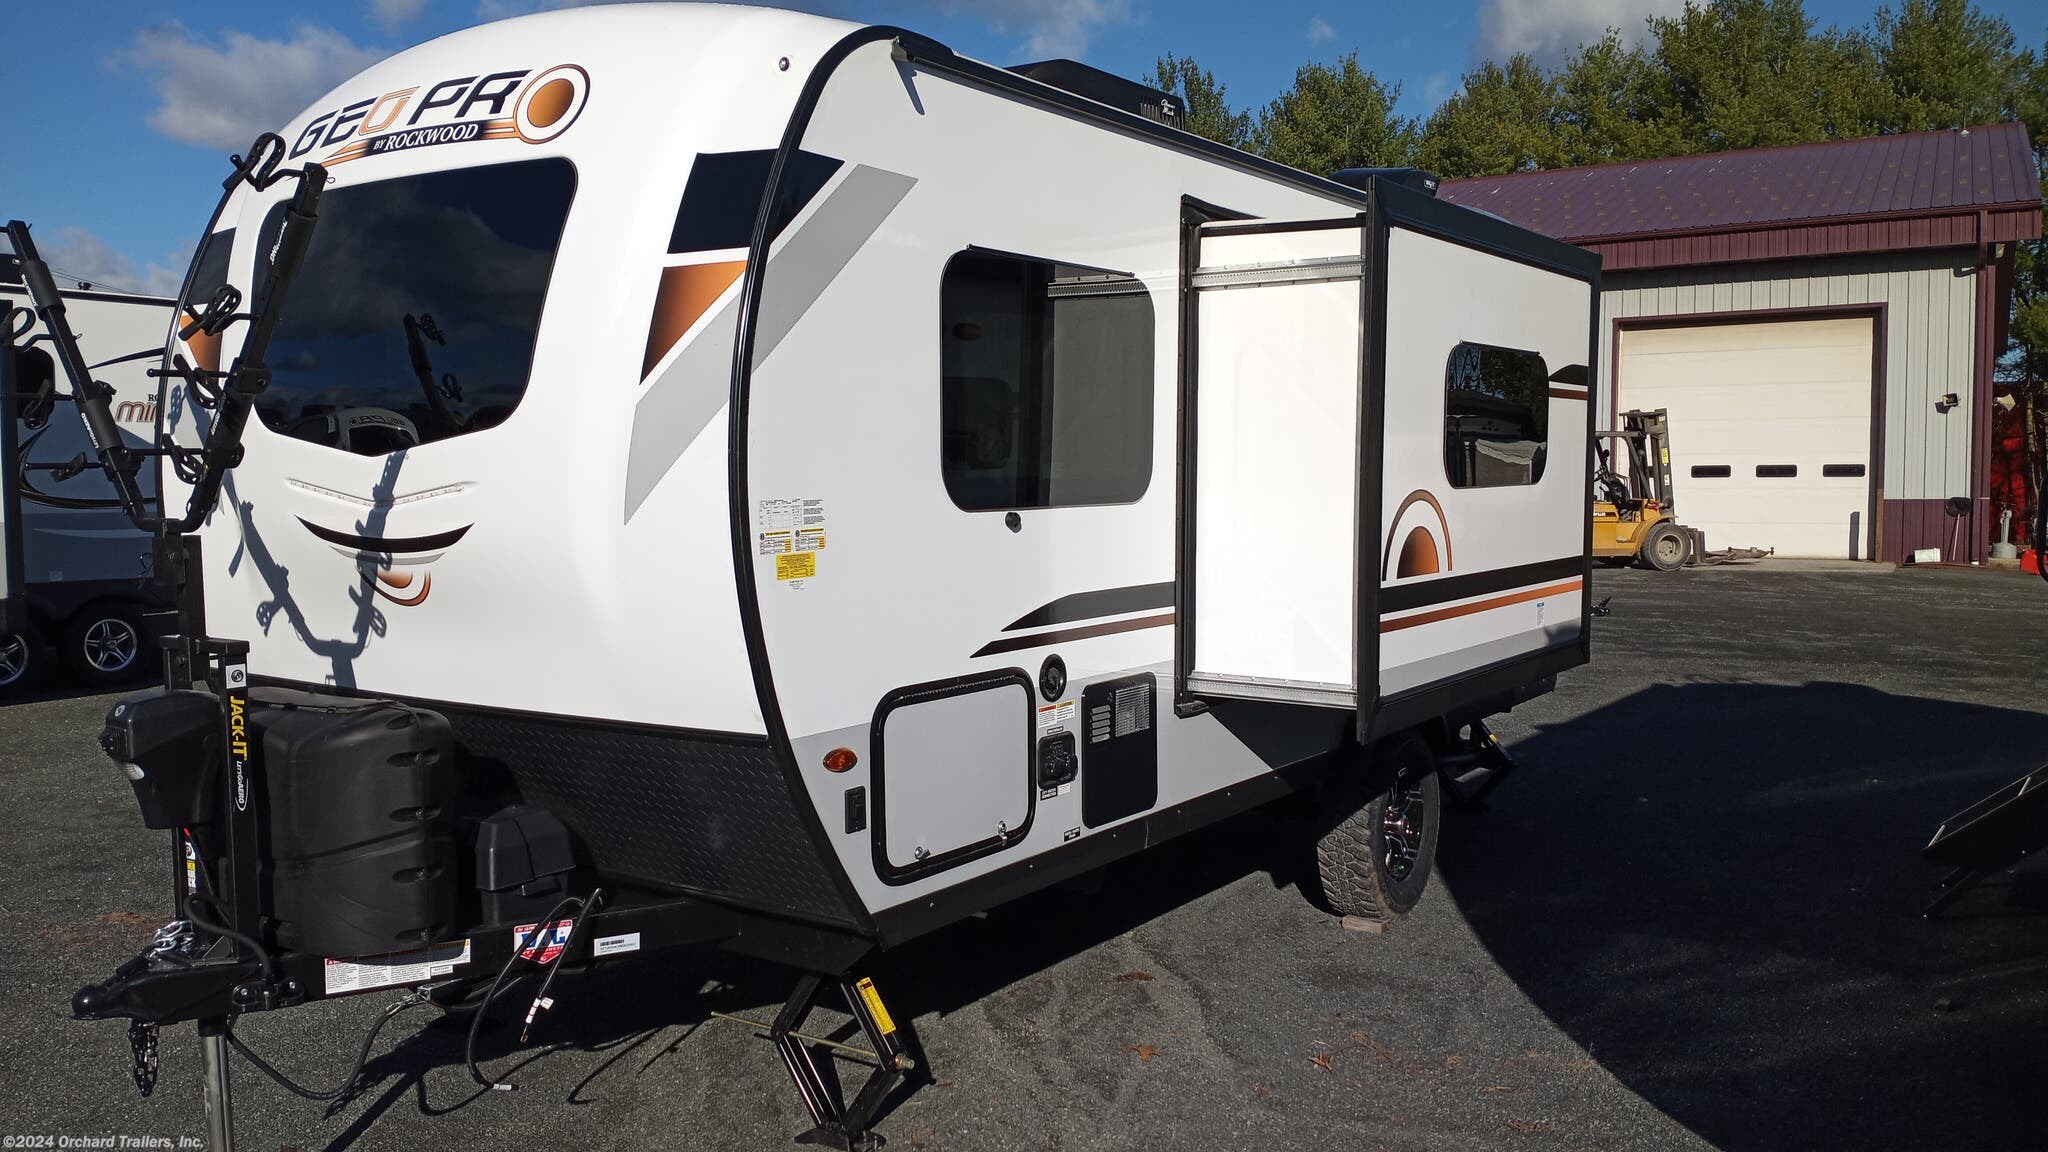 2021 Forest River Rockwood Geo Pro G19FBS RV for Sale in Whately, MA 01093 | 105267 | RVUSA.com 2021 Rockwood Geo Pro G19fbs Travel Trailer